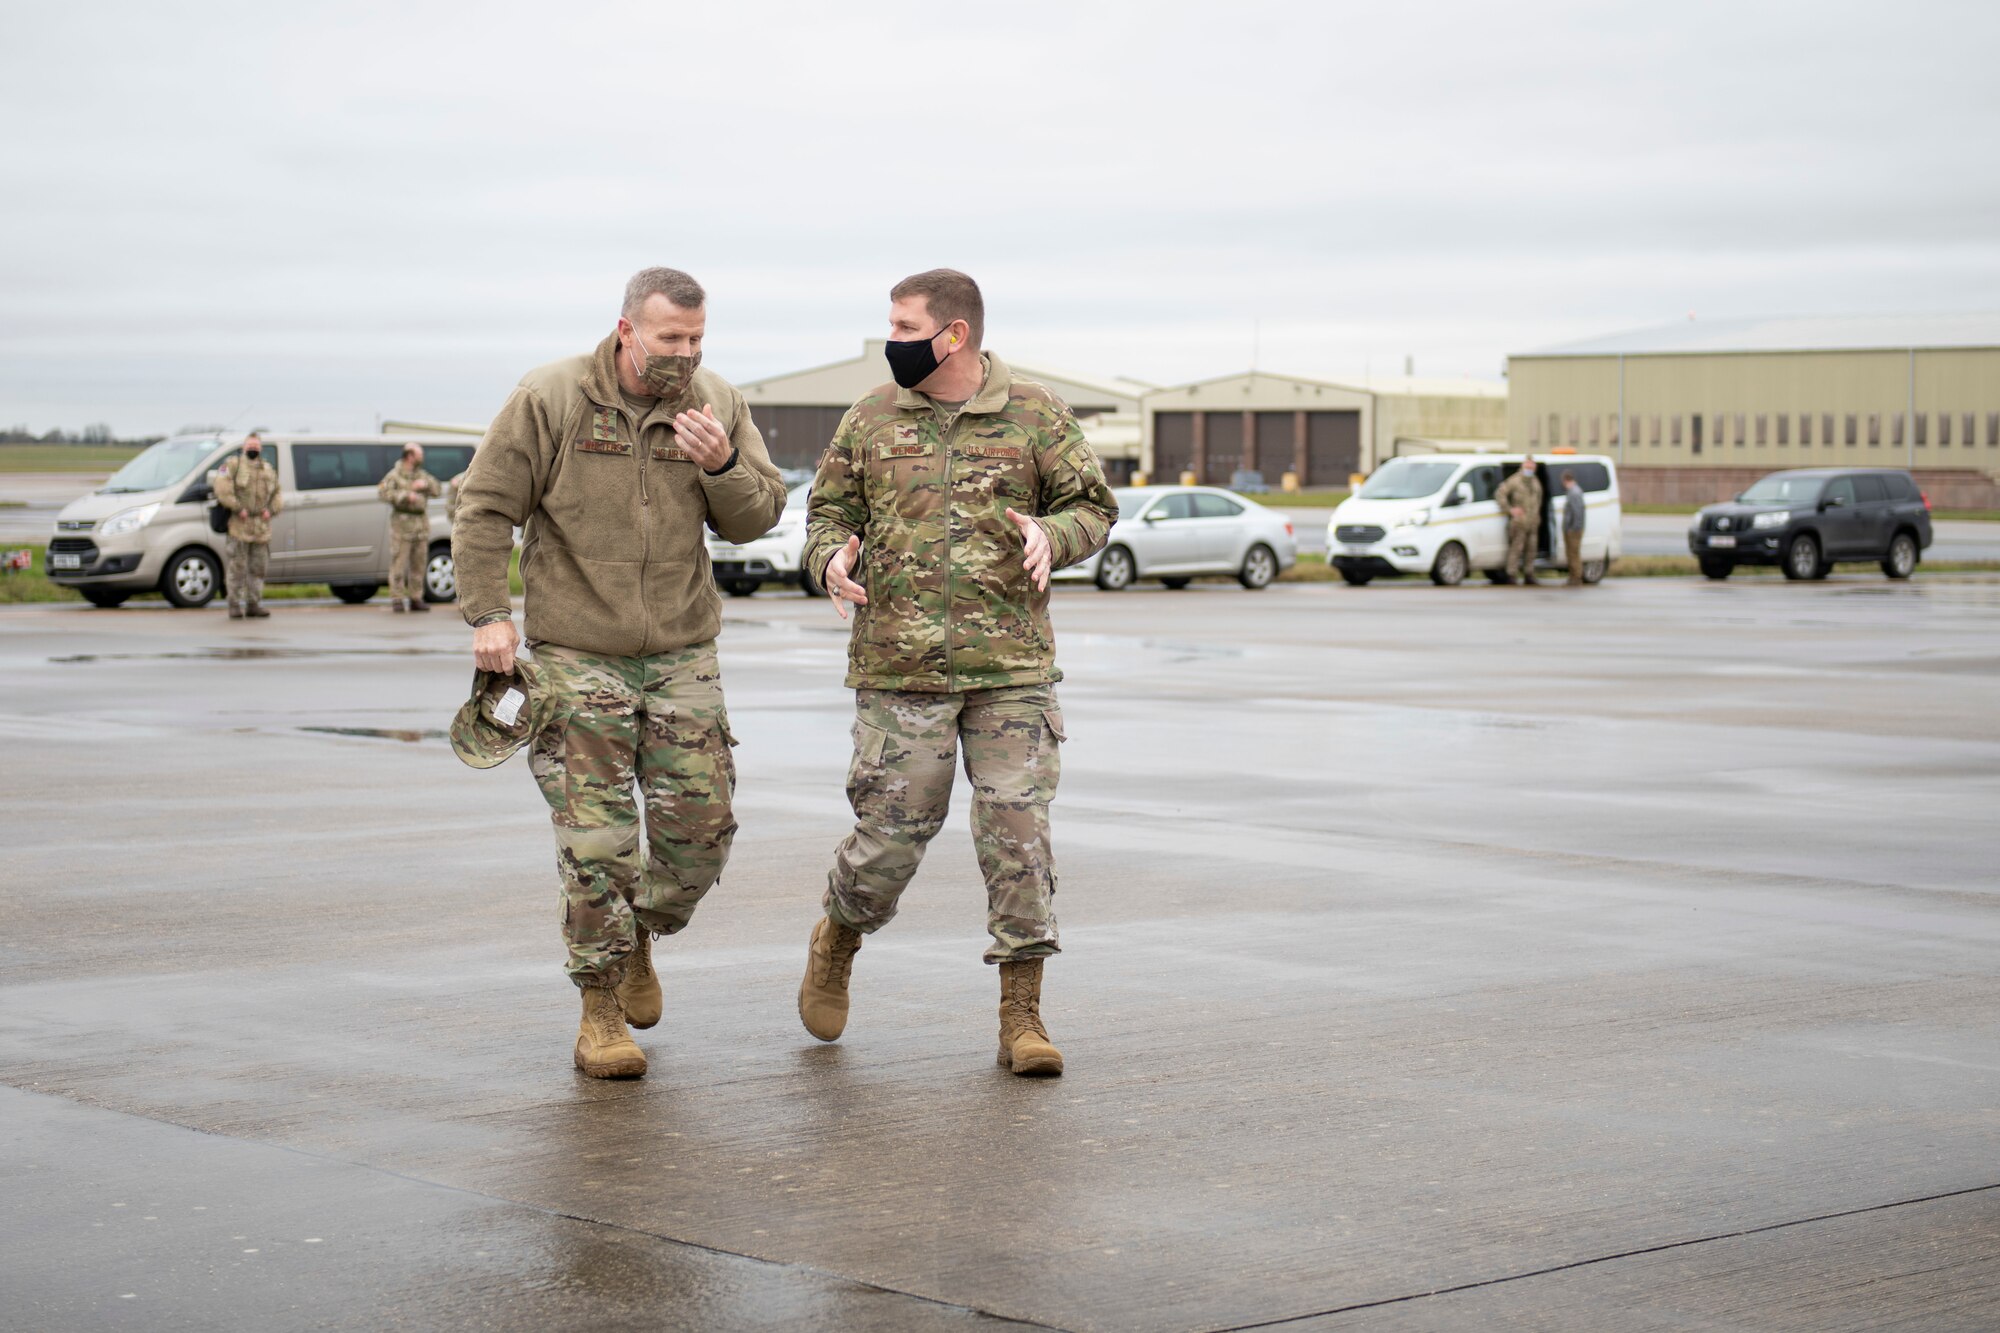 U.S. Air Force Col. Col. Kurt Wendt, right, 501st Combat Support Wing commander, converses with U.S. Air Force Gen. Tod D. Wolters, left, NATO Supreme Allied Commander Europe and U.S. European Command commander, while preparing to depart on a flight to South Cerney, England, from Royal Air Force Fairford, England, Nov. 18, 2020, in support of NATO Exercise Loyal Leda 2020 (LOLE20). Allied Land Command (LANDCOM) conducted a combat readiness evaluation on the NATO Headquarters Allied Rapid Reaction Corp (ARRC) during LOLE20, which took place at RAF Fairford and South Cerney, England, Nov. 9-19, 2020. This was a complex multi-domain exercise designed to test the war-fighting capabilities of the ARRC in a COVID-19 environment including combat operations. LOLE20 was a key NATO exercise to validate and certify the Gloucester-based ARRC as a NATO war-fighting corps at full operational readiness, capable of commanding up to 120,000 multinational troops across a full spectrum of military operations. (U.S. Air Force photo by Senior Airman Jennifer Zima)